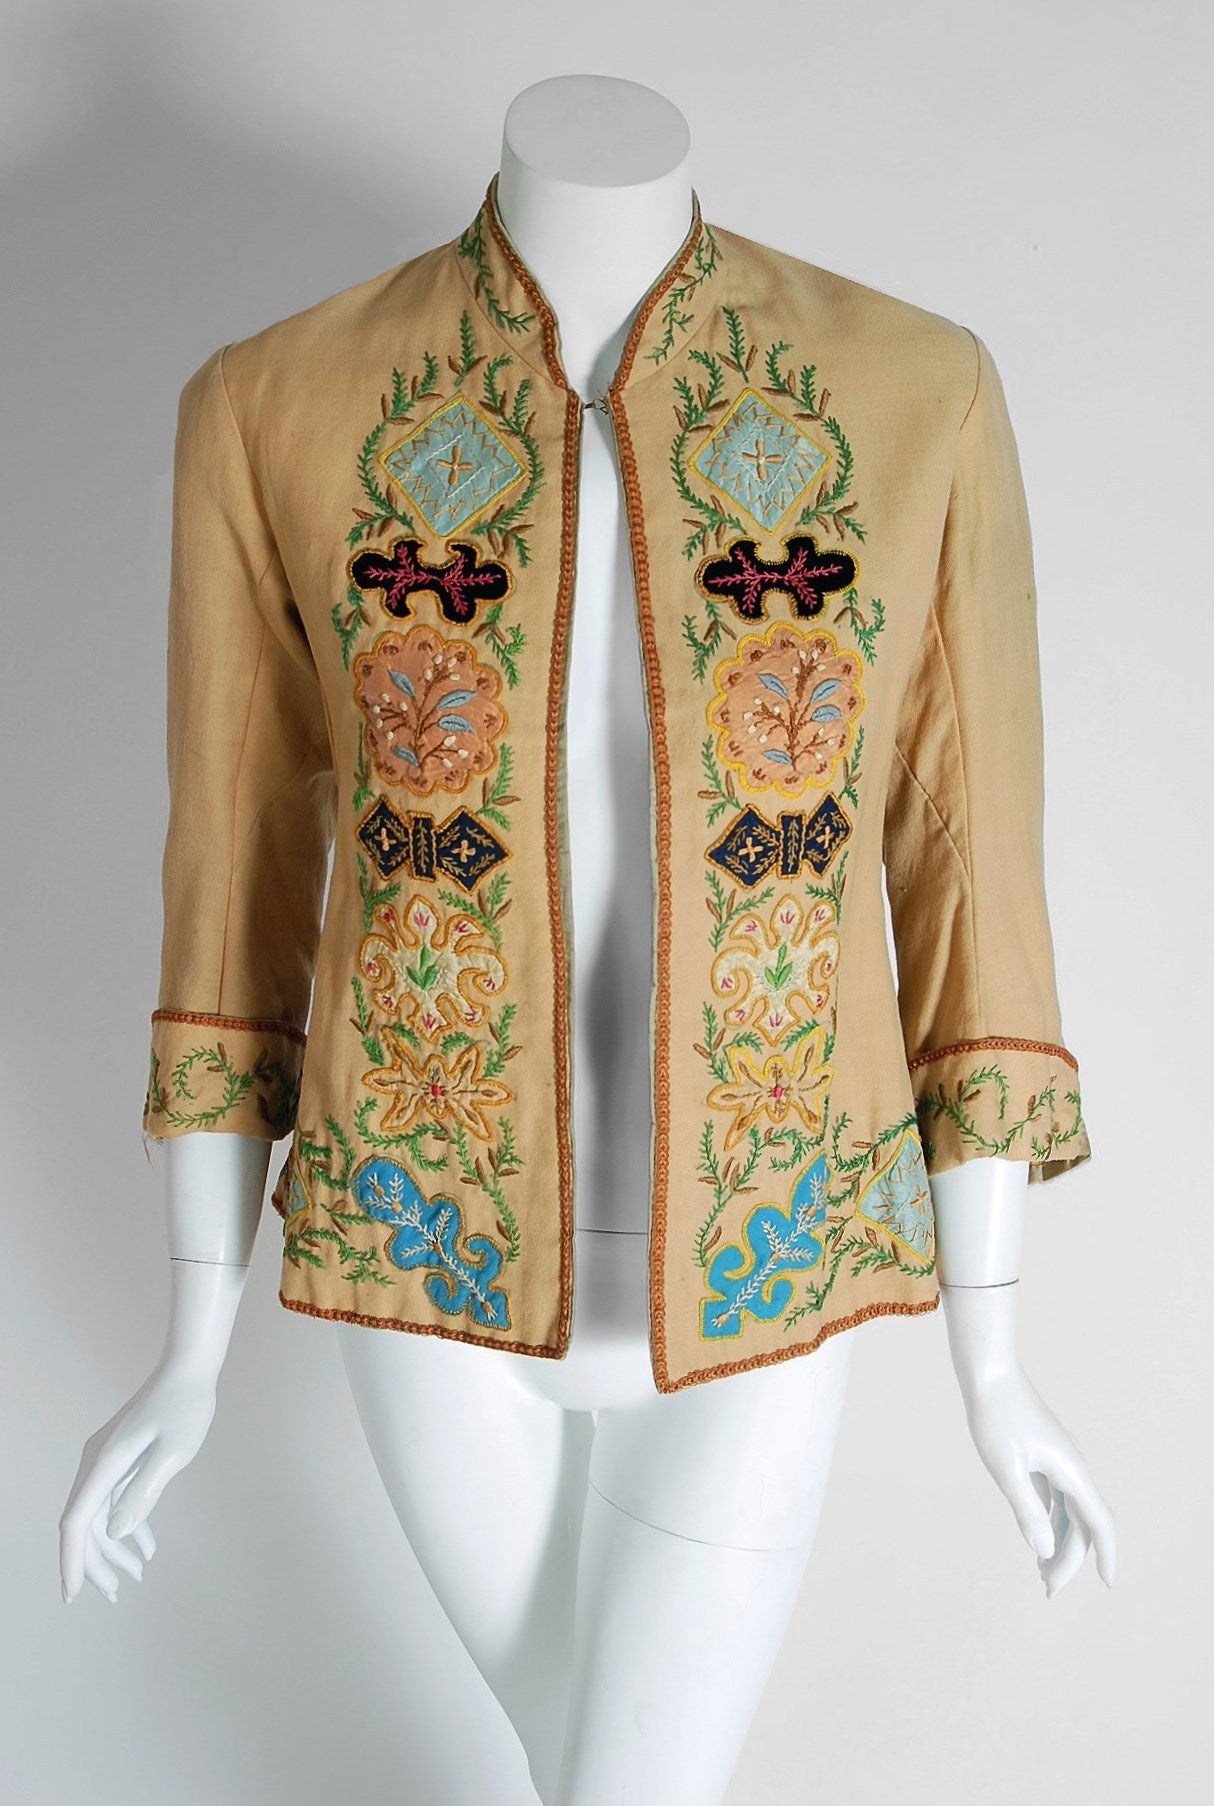 This breathtaking Victorian couture jacket, dating back to the 1870's, is in a class of its own. The detailed construction and meticulous attention to detail are comparable to what you will find in modern day haute-couture. The exquisite colorful